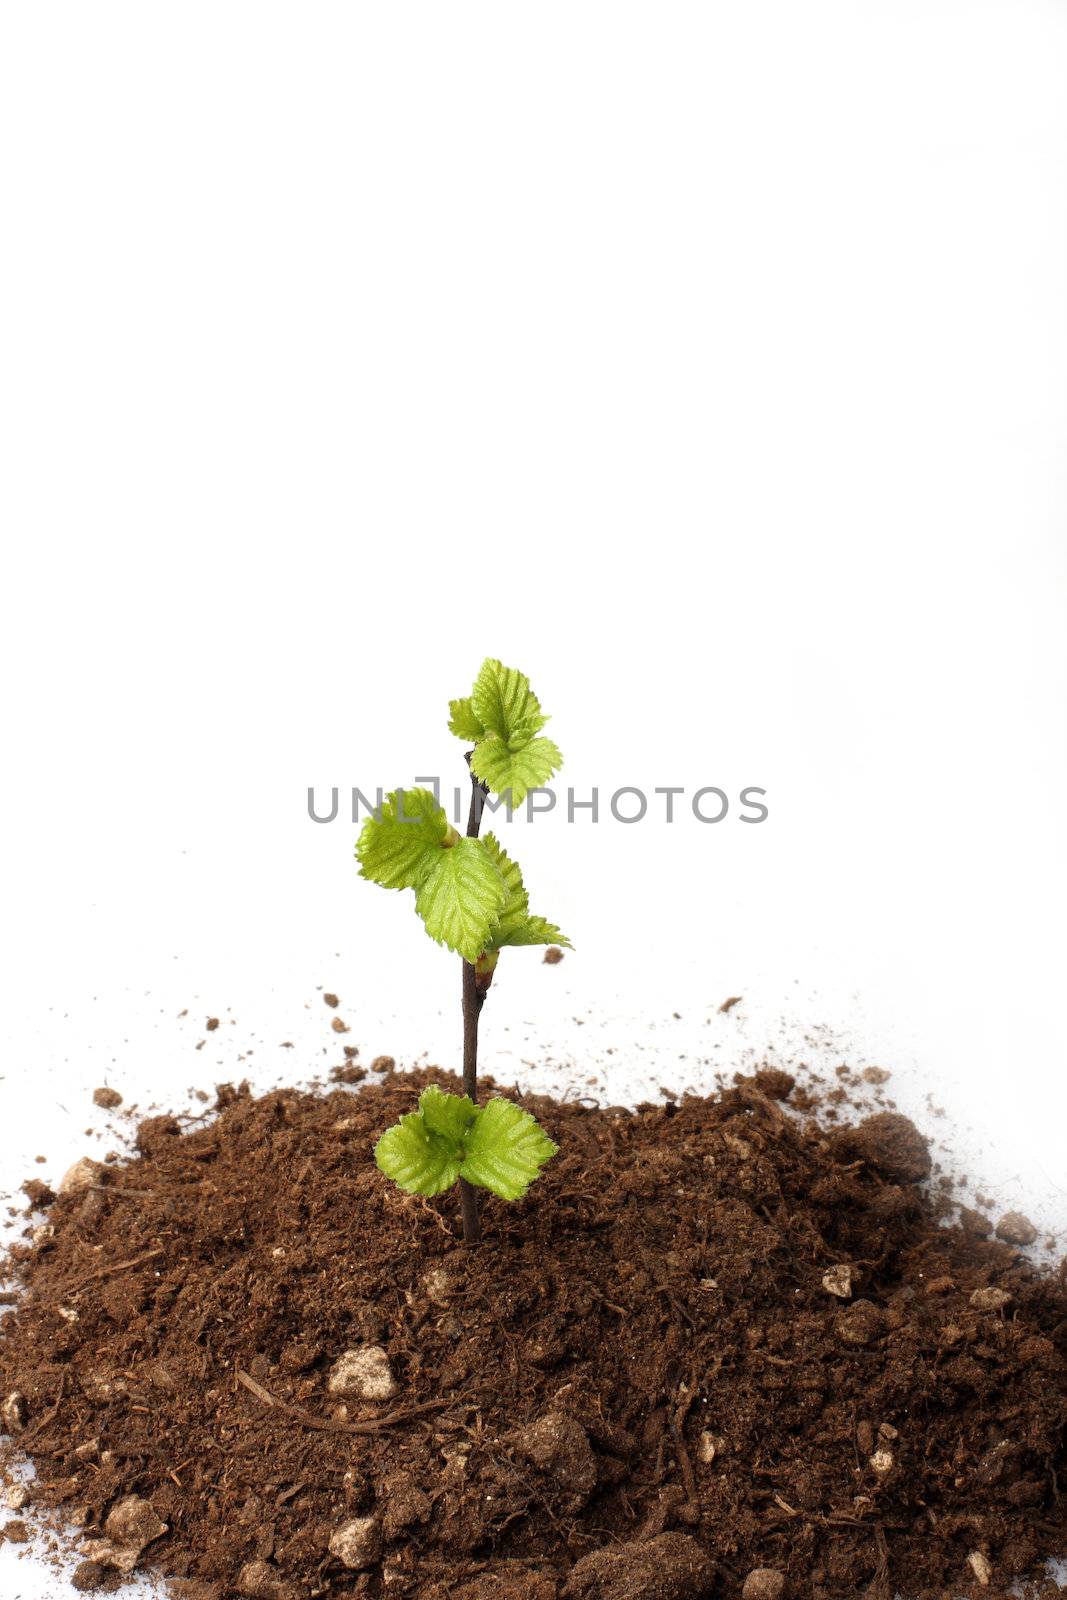 A small sapling growing from a pile of dirt, isolated on white, concept shot depicting hope